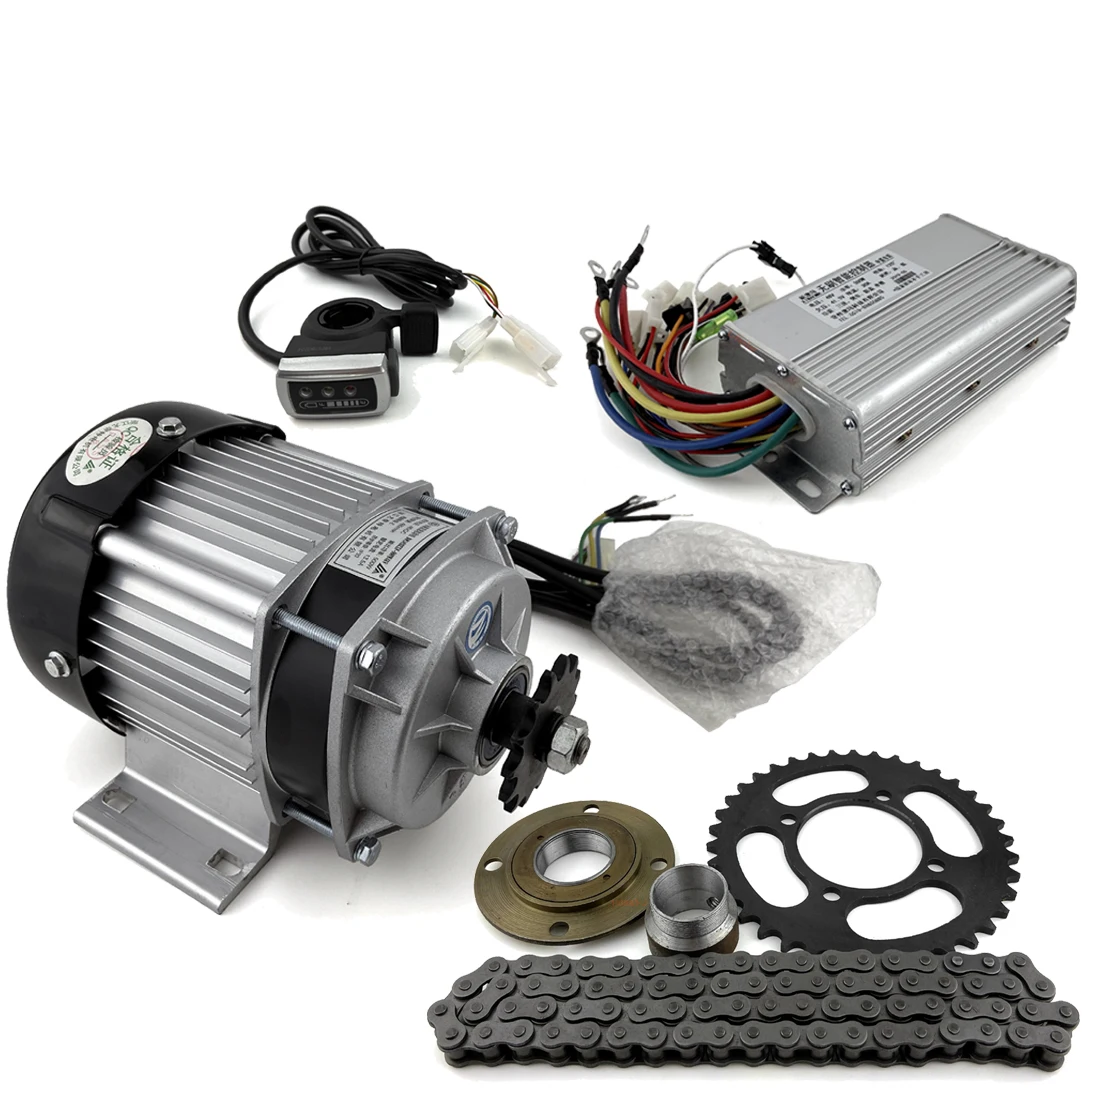 

48V 500W Electric Motor Tricycle Bike Conversion Kit Brushless DC Motor With Planetary Gear Controlled By Thumb Throttle